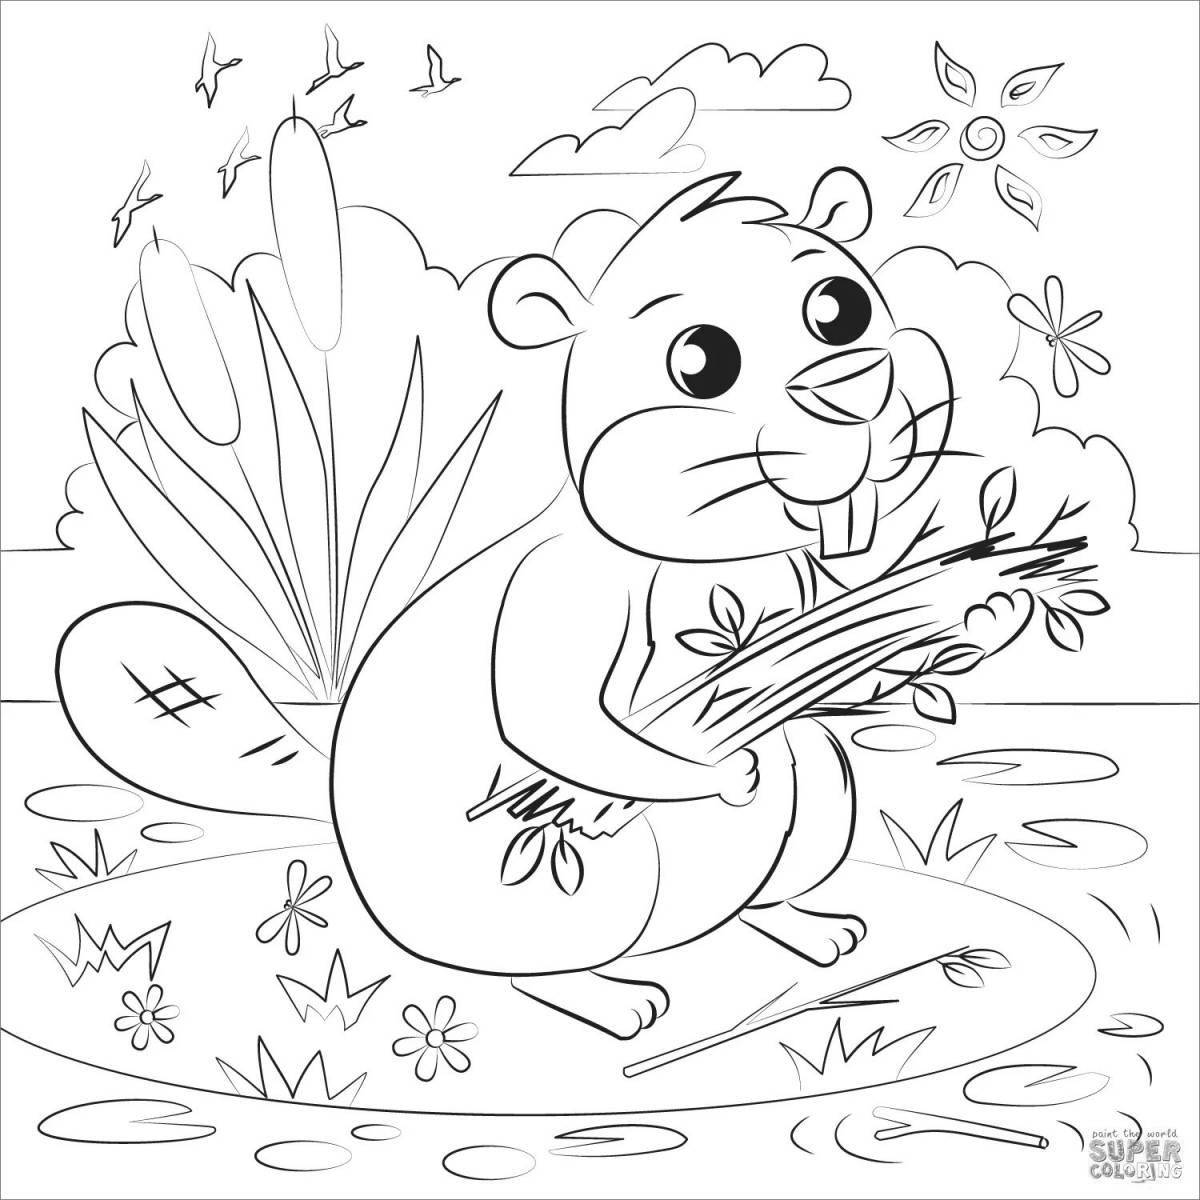 Exciting beaver coloring book for kids